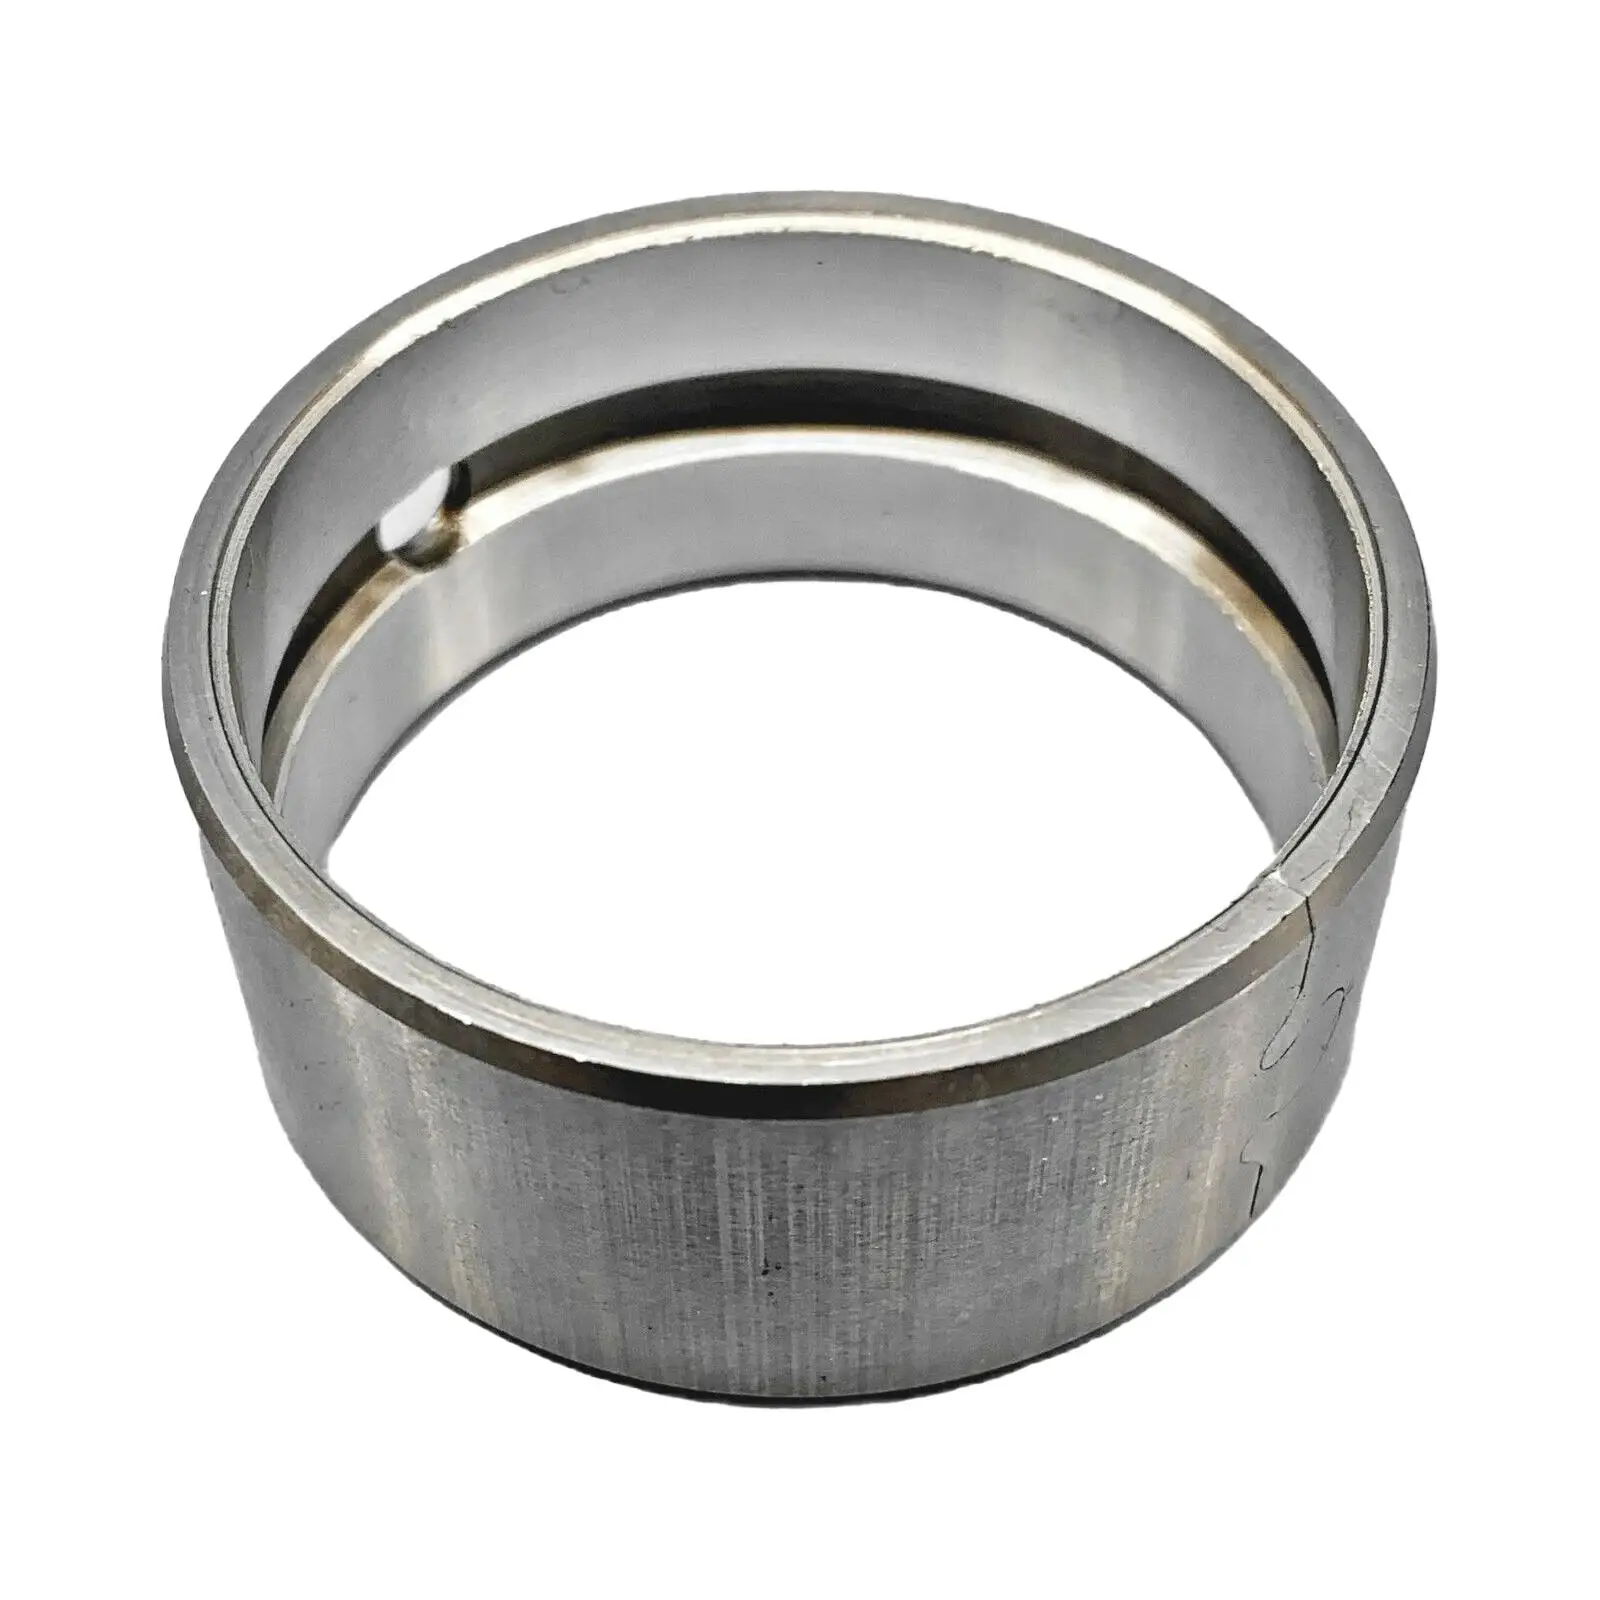 Crank Main Bearing Bushing Component Replaces Durable for 570 Motors 450 Engines